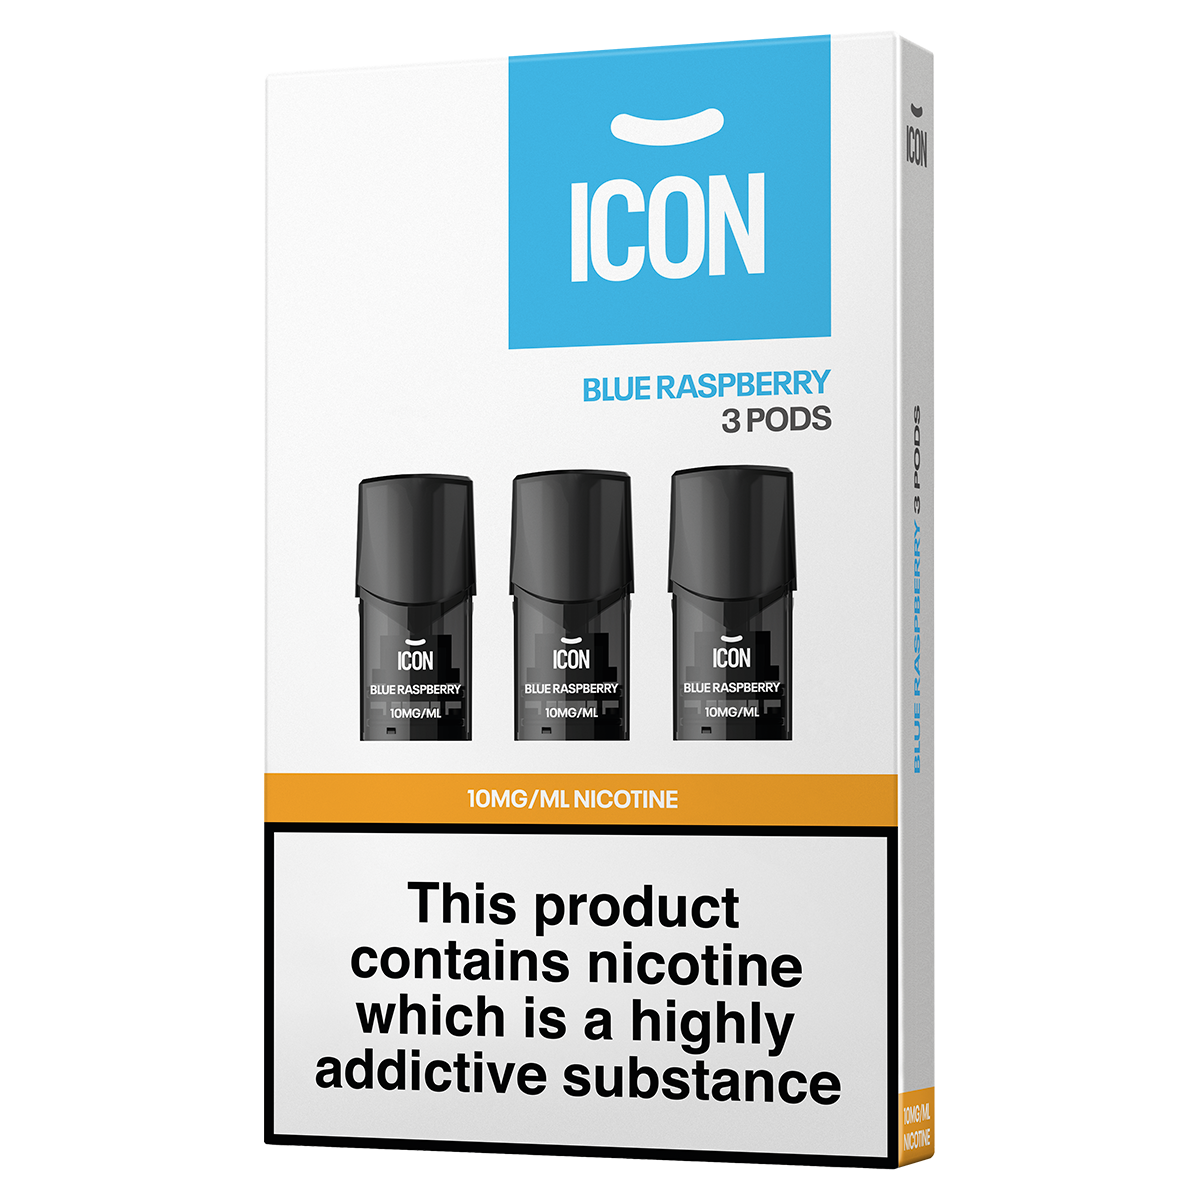 ICON Vape Blue Raspberry Pods (Pack of 3) 10mg